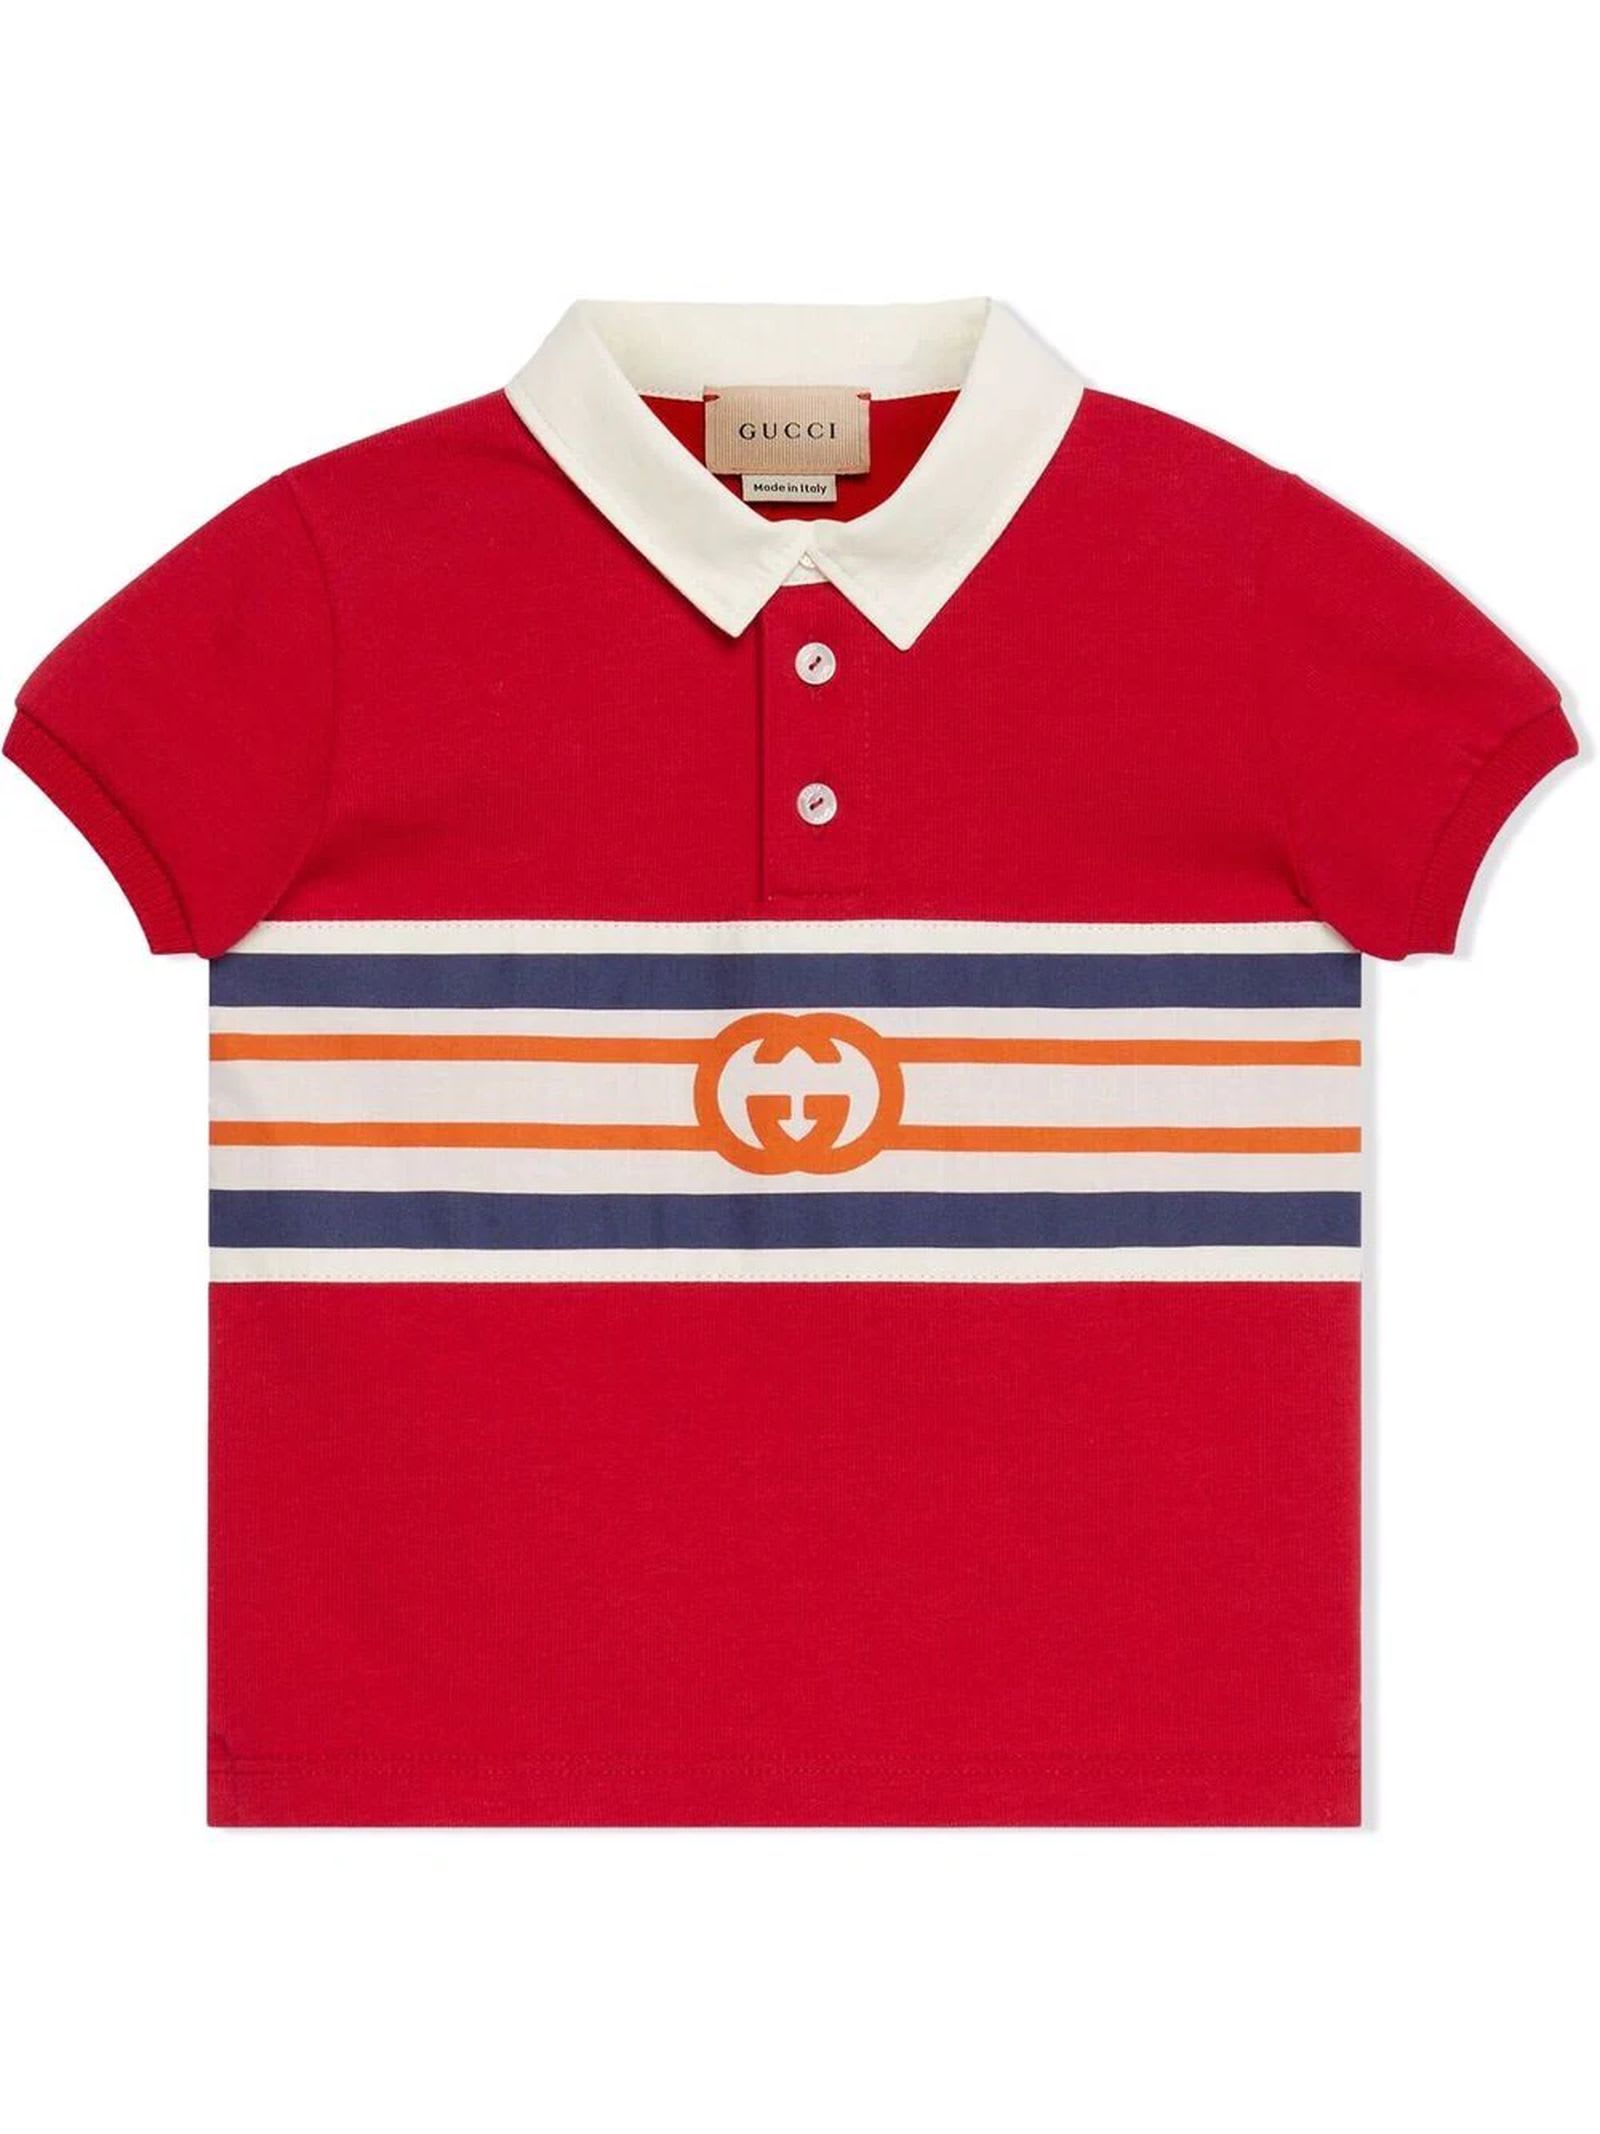 Gucci Red Cotton Jersey Polo